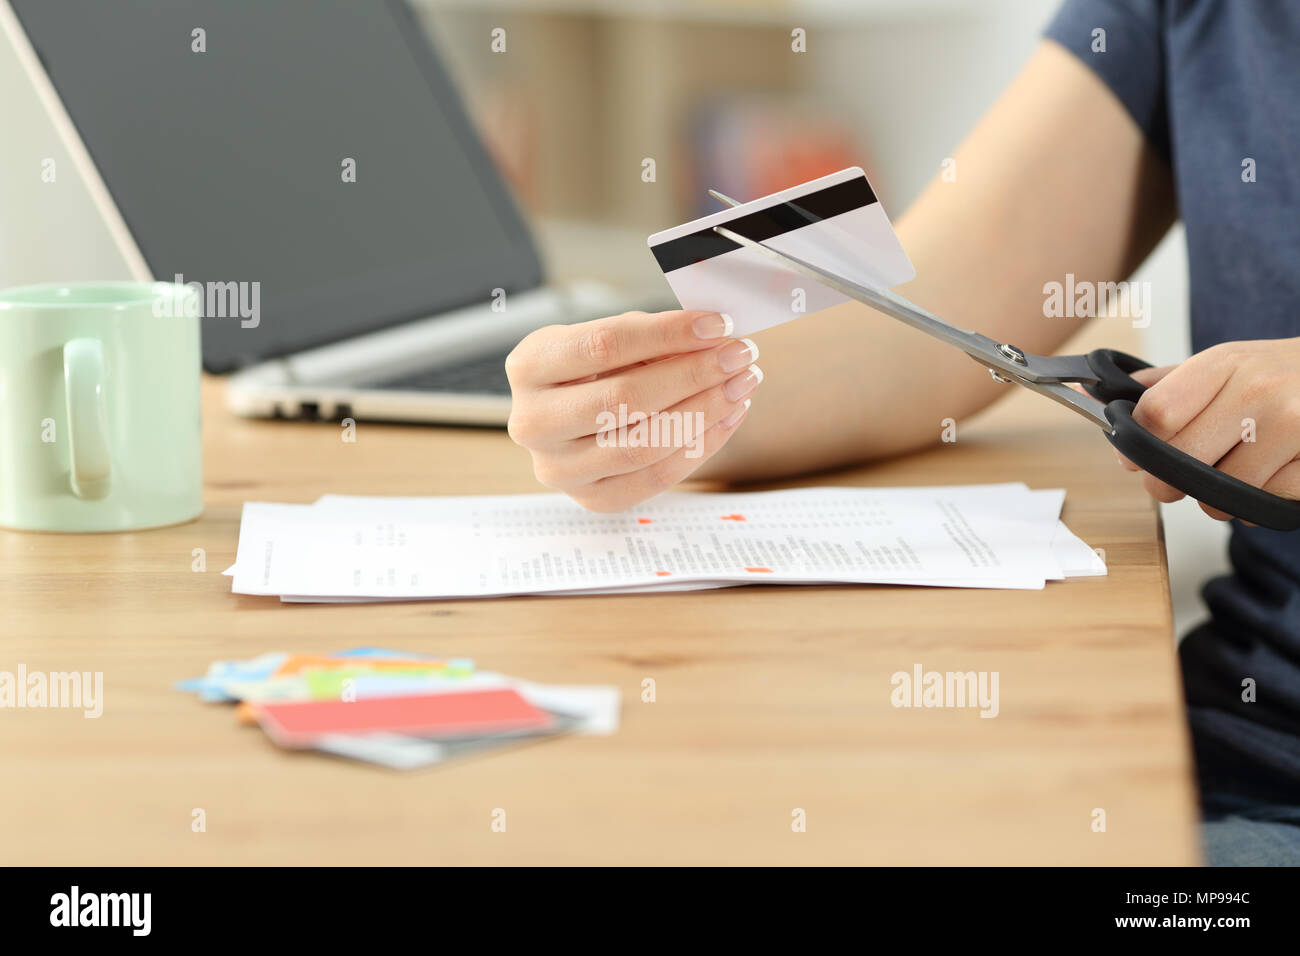 Close up of a woman hands destroying old credit cards Stock Photo